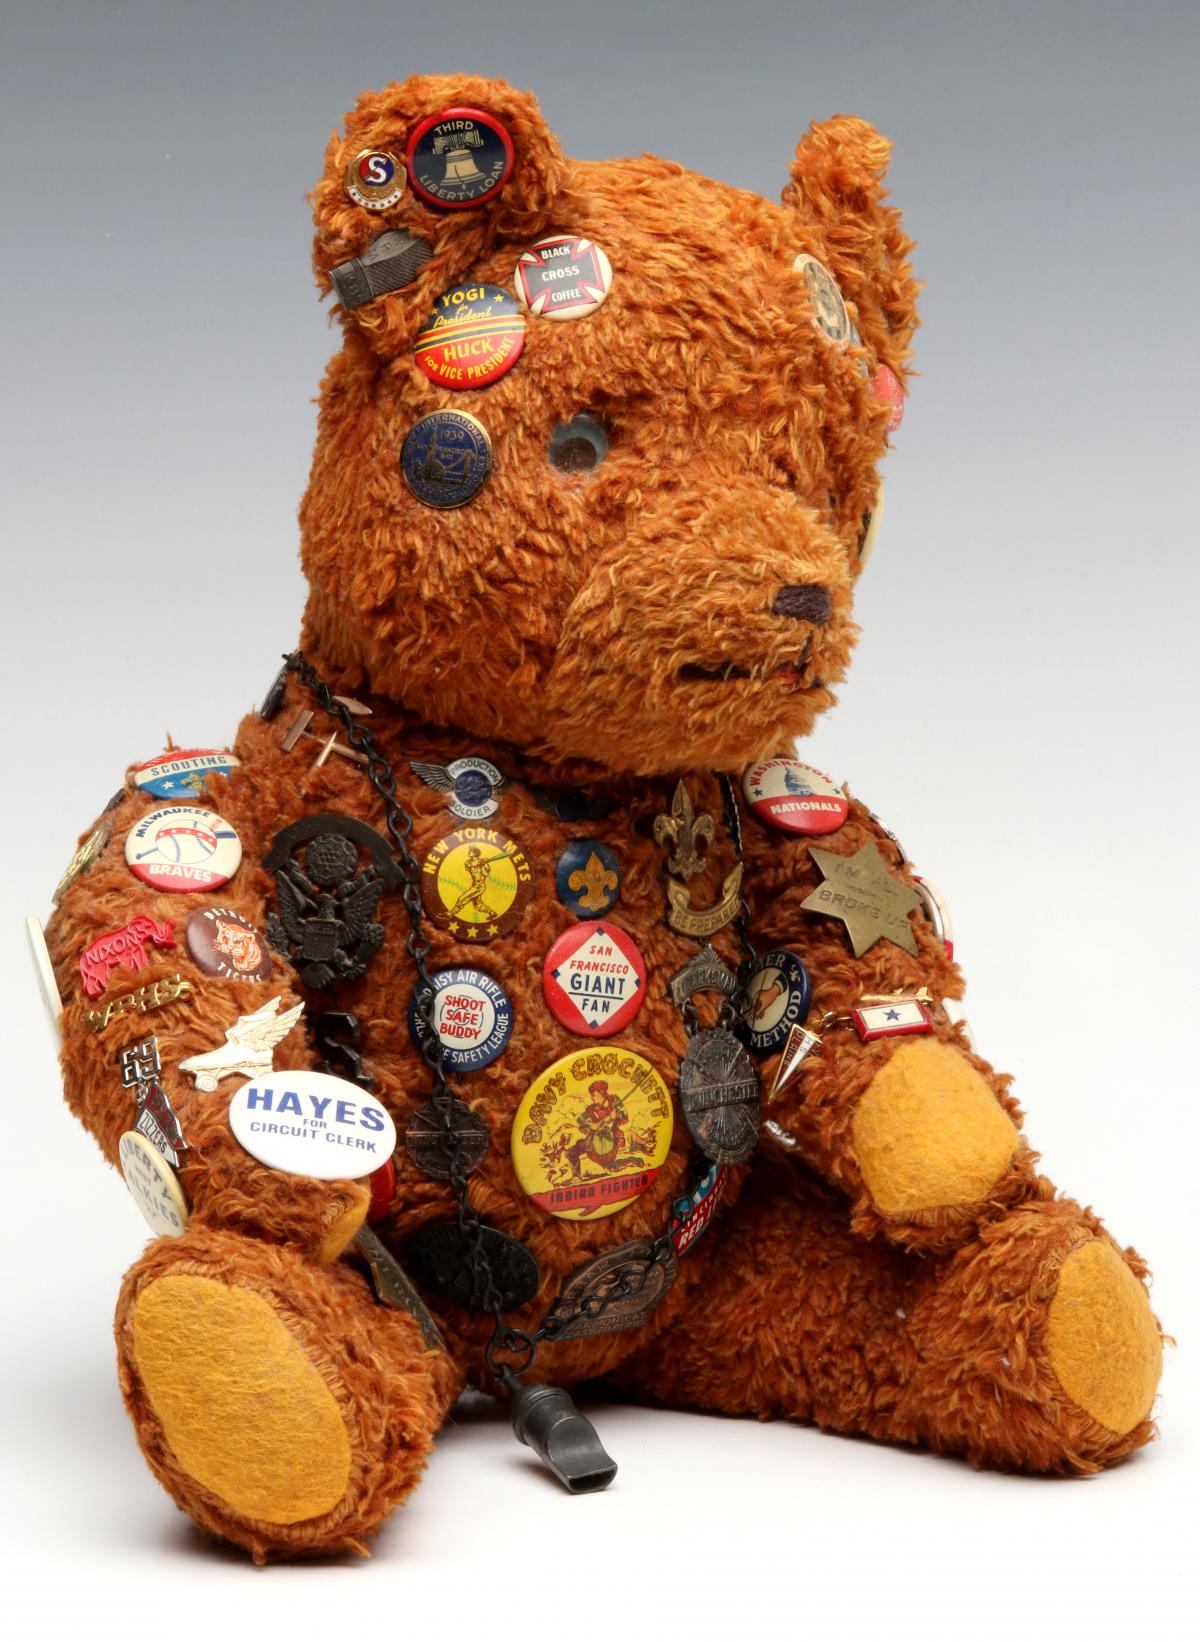 1940s TEDDY BEAR COVERED WITH PERIOD BUTTONS & BADGES